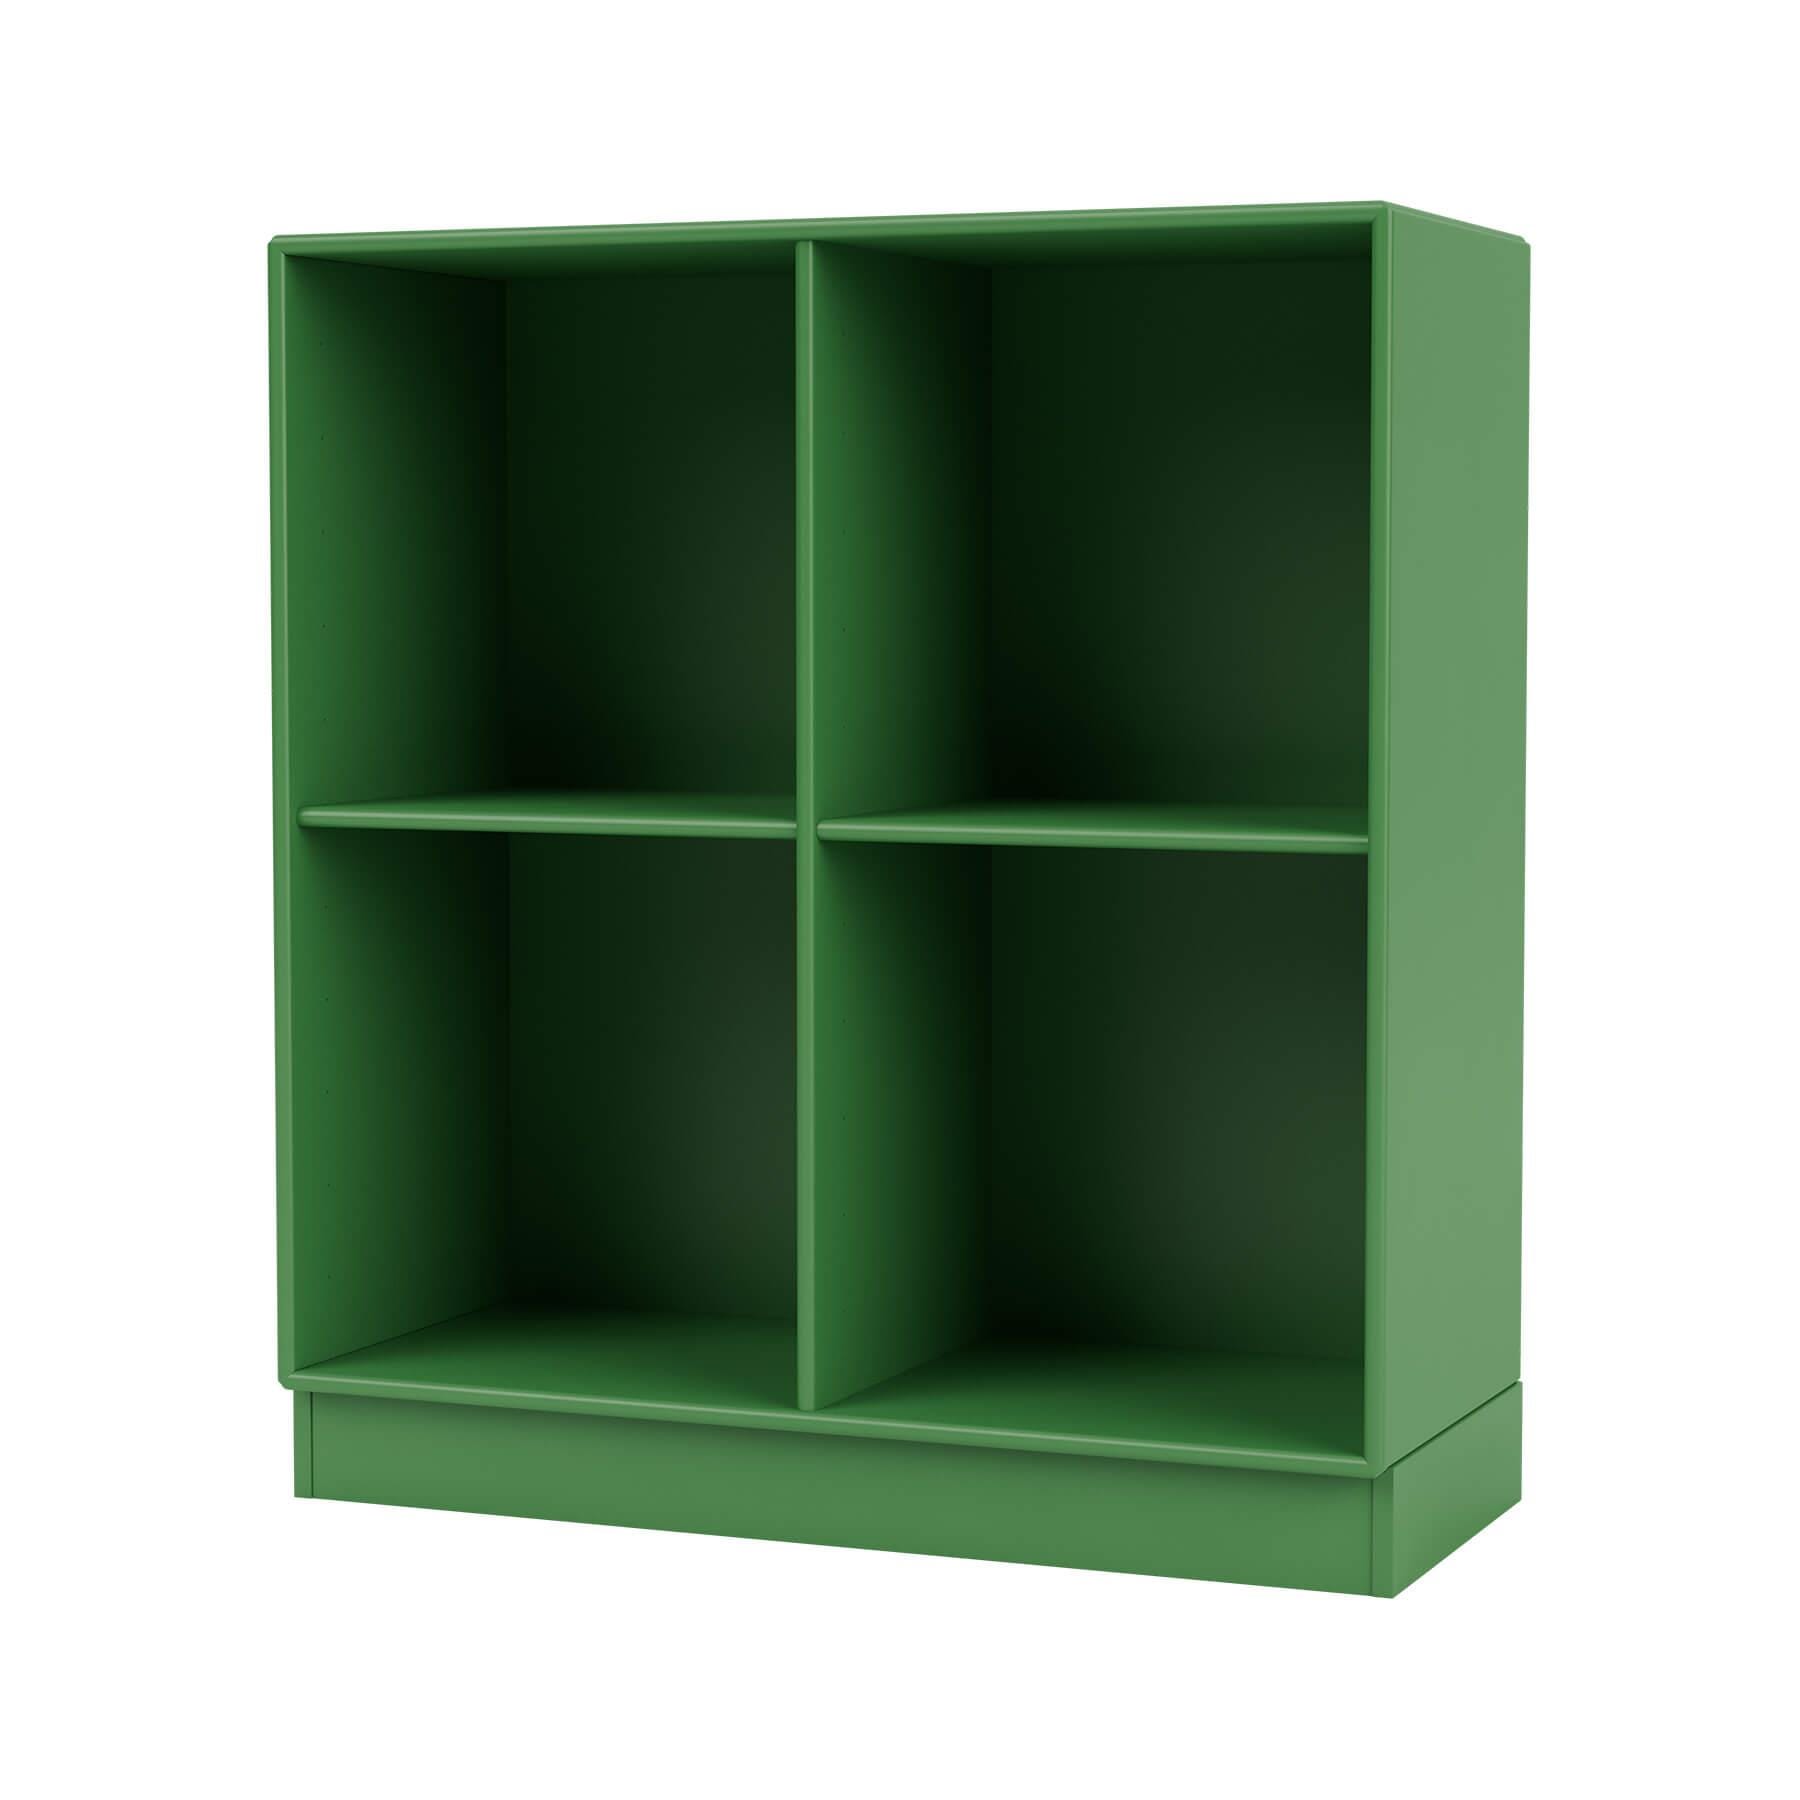 Montana Show Bookcase Parsley Plinth Green Designer Furniture From Holloways Of Ludlow